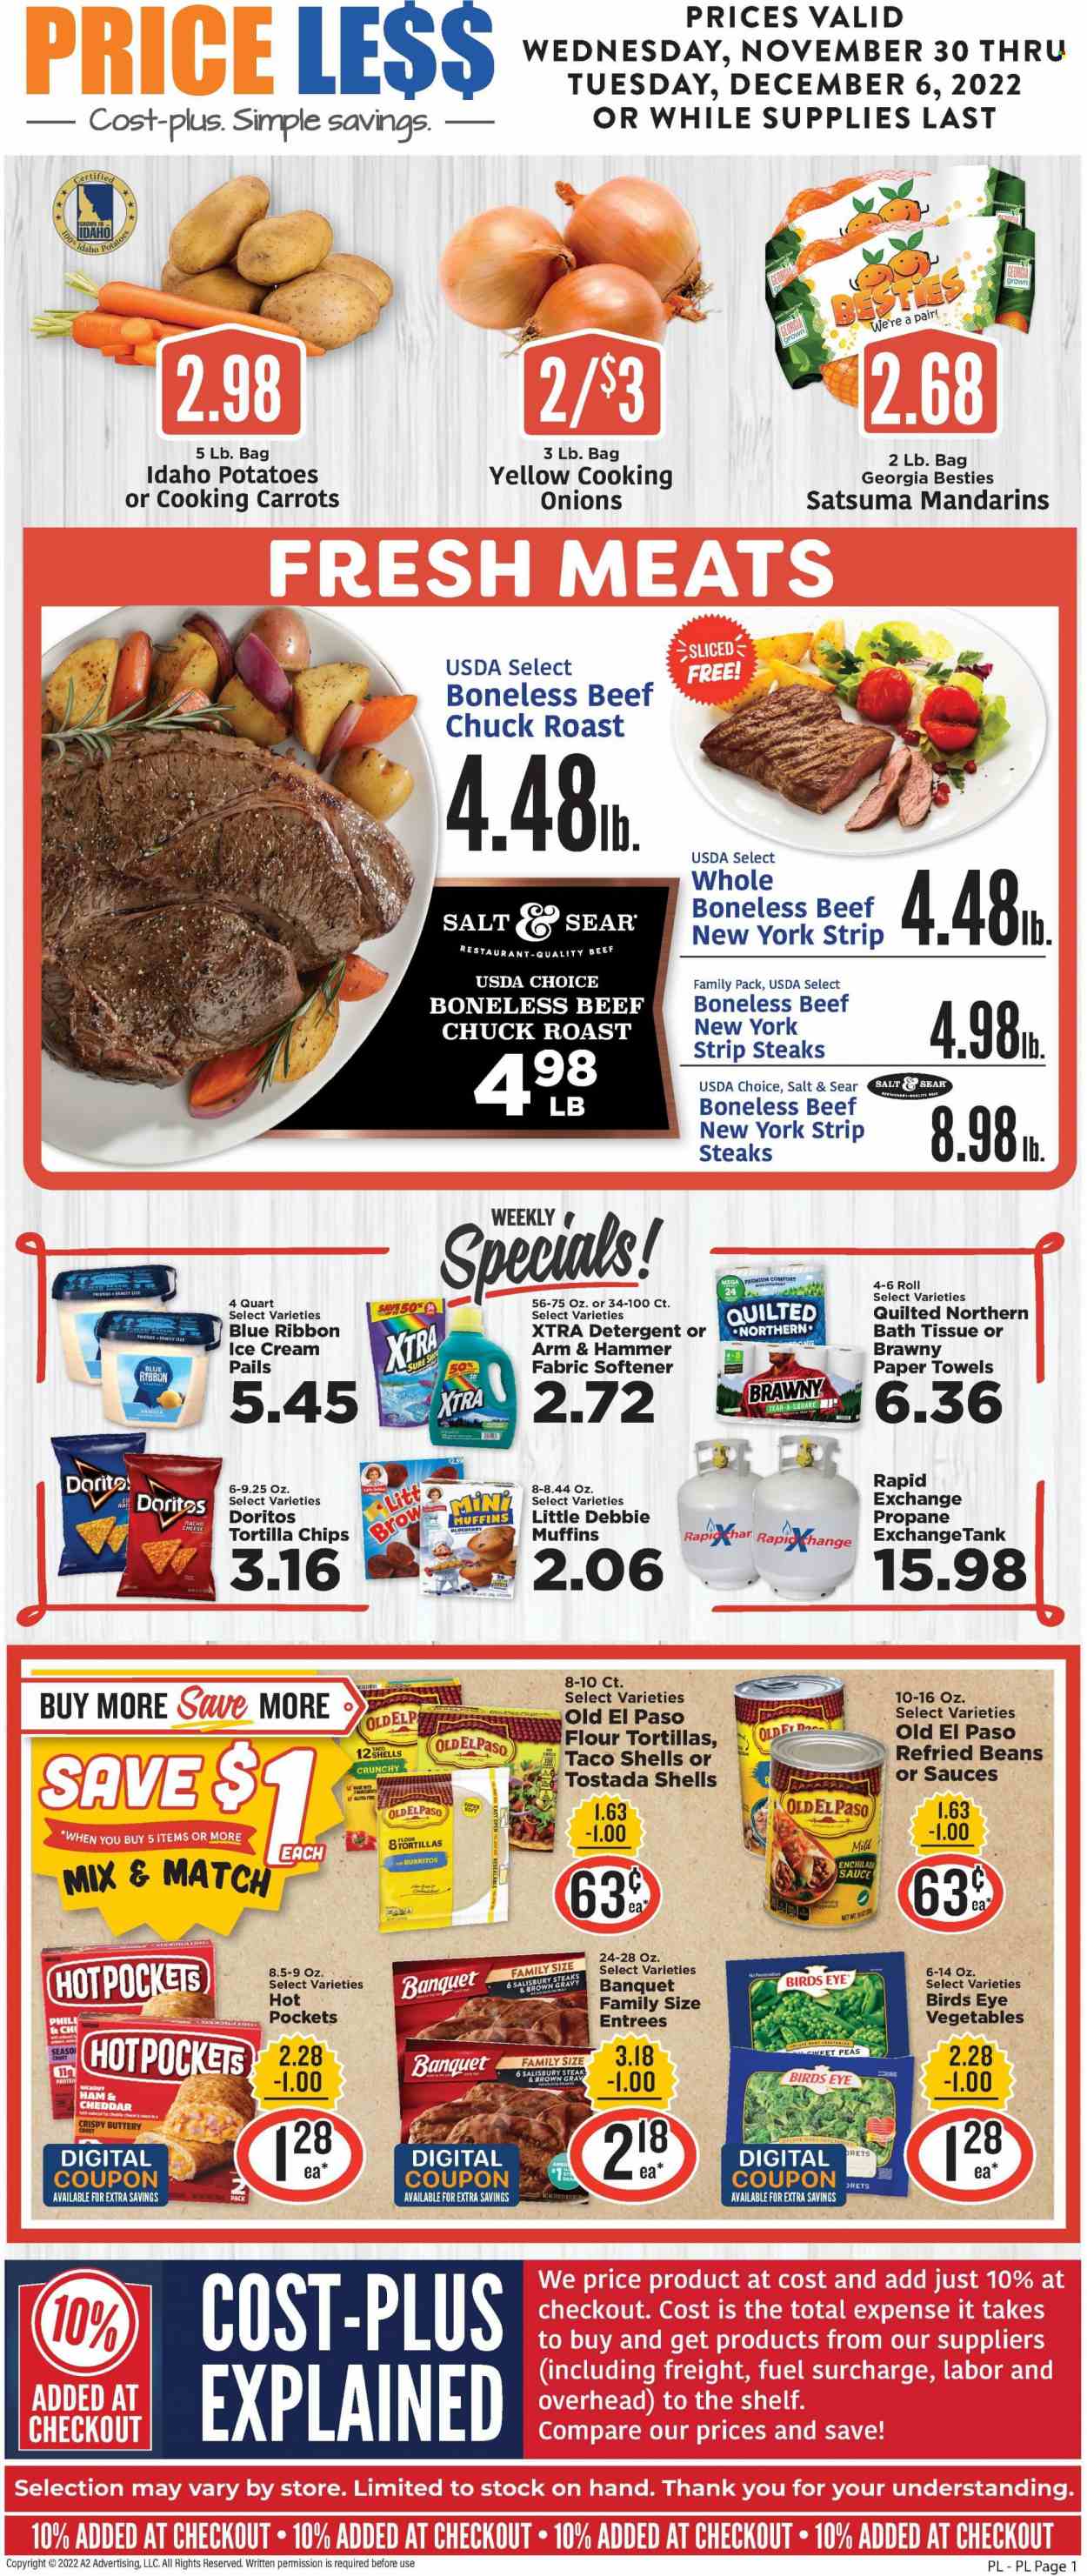 thumbnail - Price Less Foods Flyer - 11/30/2022 - 12/06/2022 - Sales products - Blue Ribbon, Old El Paso, flour tortillas, muffin, potatoes, onion, mandarines, hot pocket, Bird's Eye, burrito, ham, Nestlé, Doritos, tortilla chips, chips, ARM & HAMMER, enchilada sauce, refried beans, beef meat, steak, chuck roast, striploin steak, bath tissue, Quilted Northern, kitchen towels, paper towels, detergent, fabric softener, XTRA, Sure, tank. Page 1.